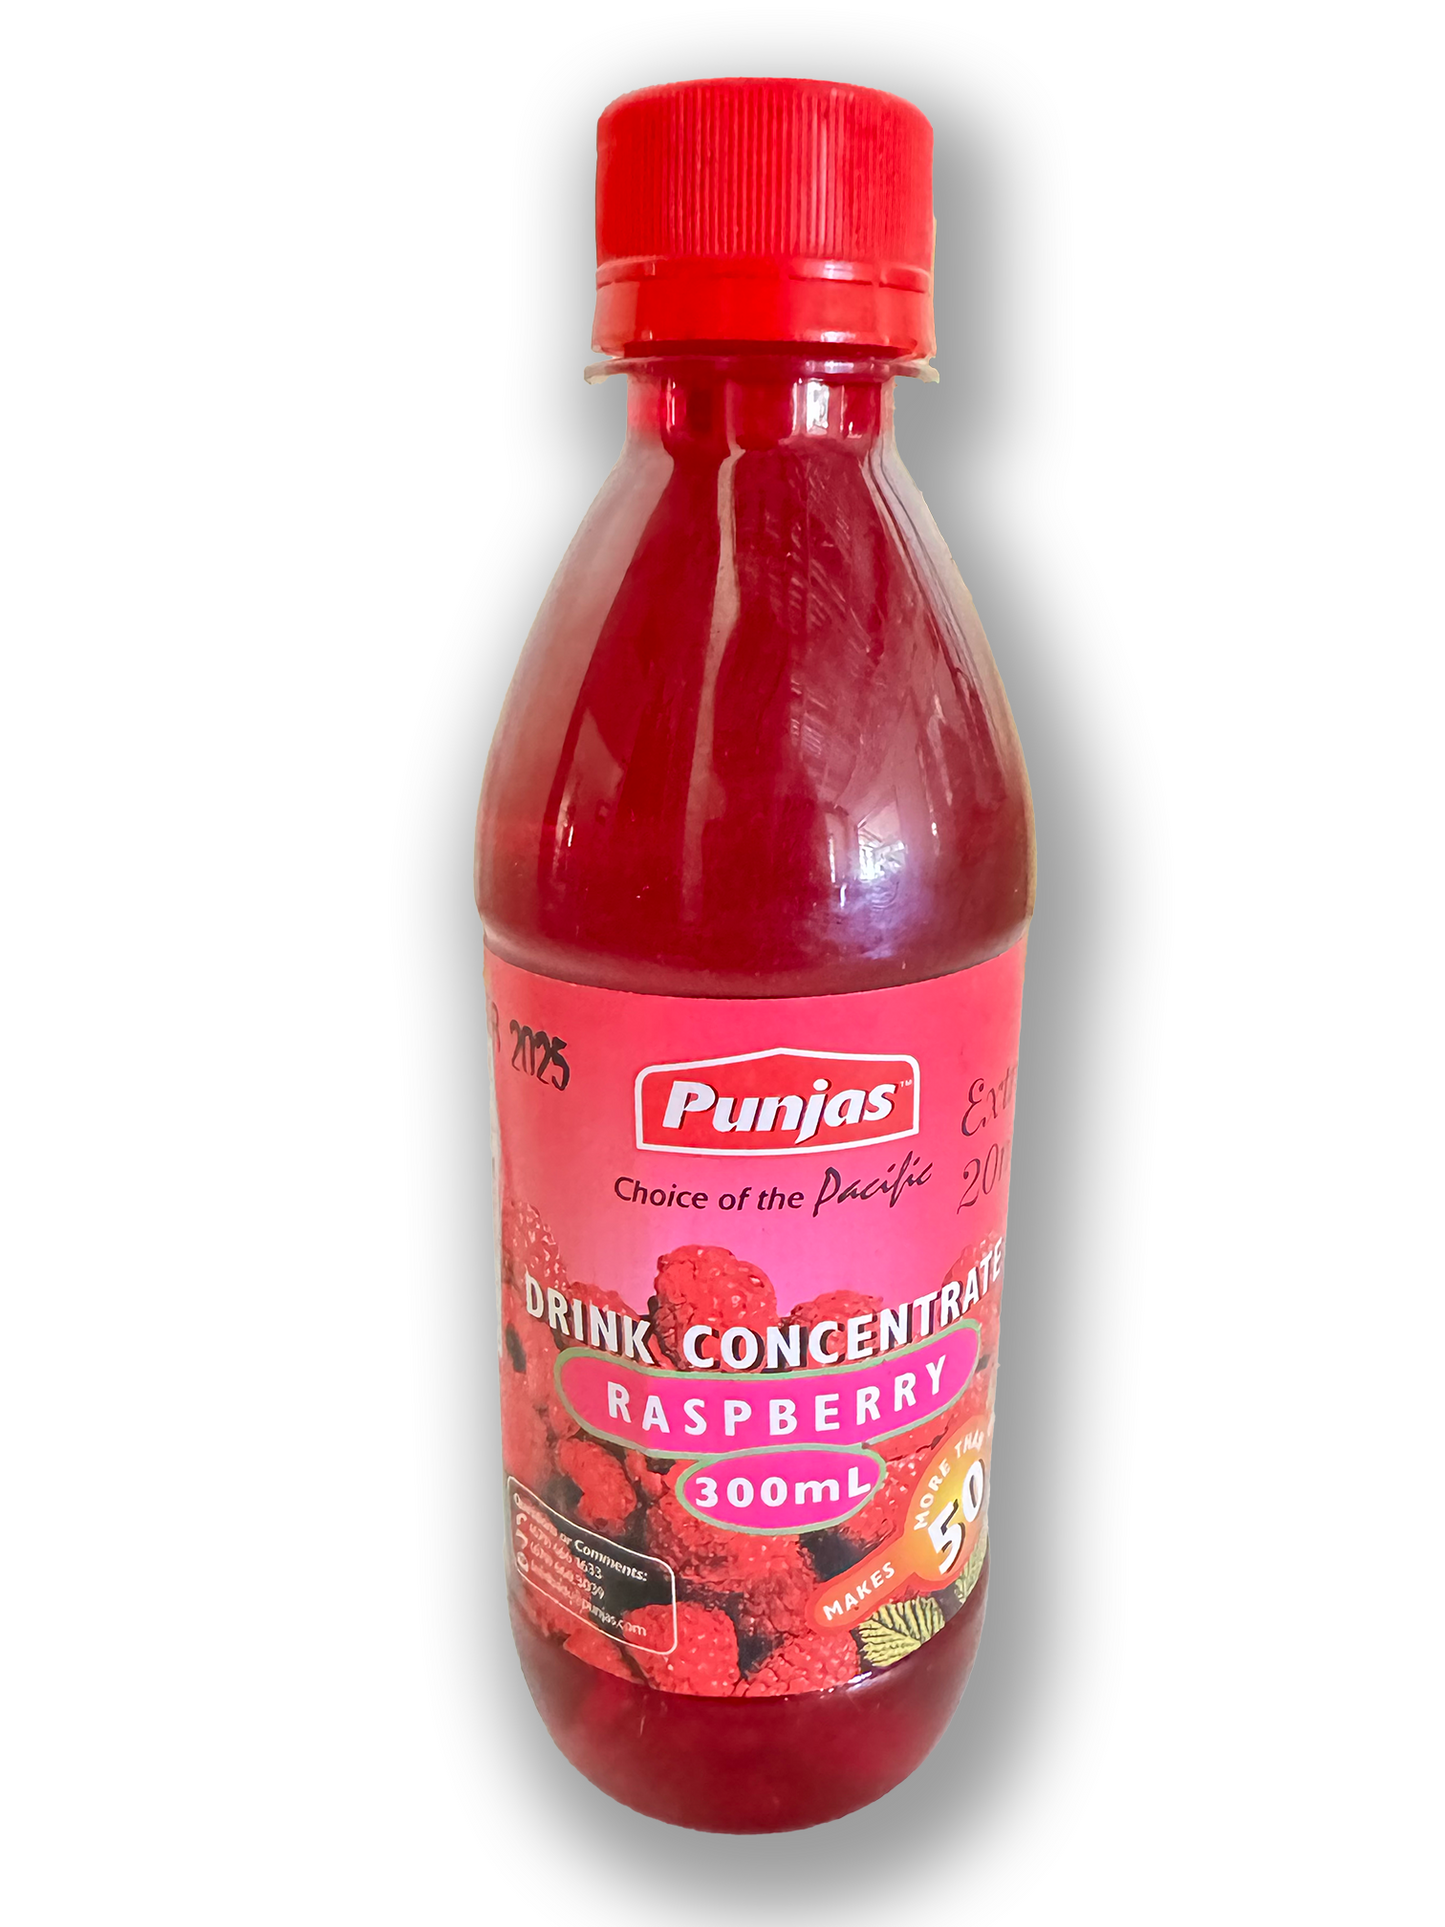 Punjas Raspberry Drink Concentrate 300ml **